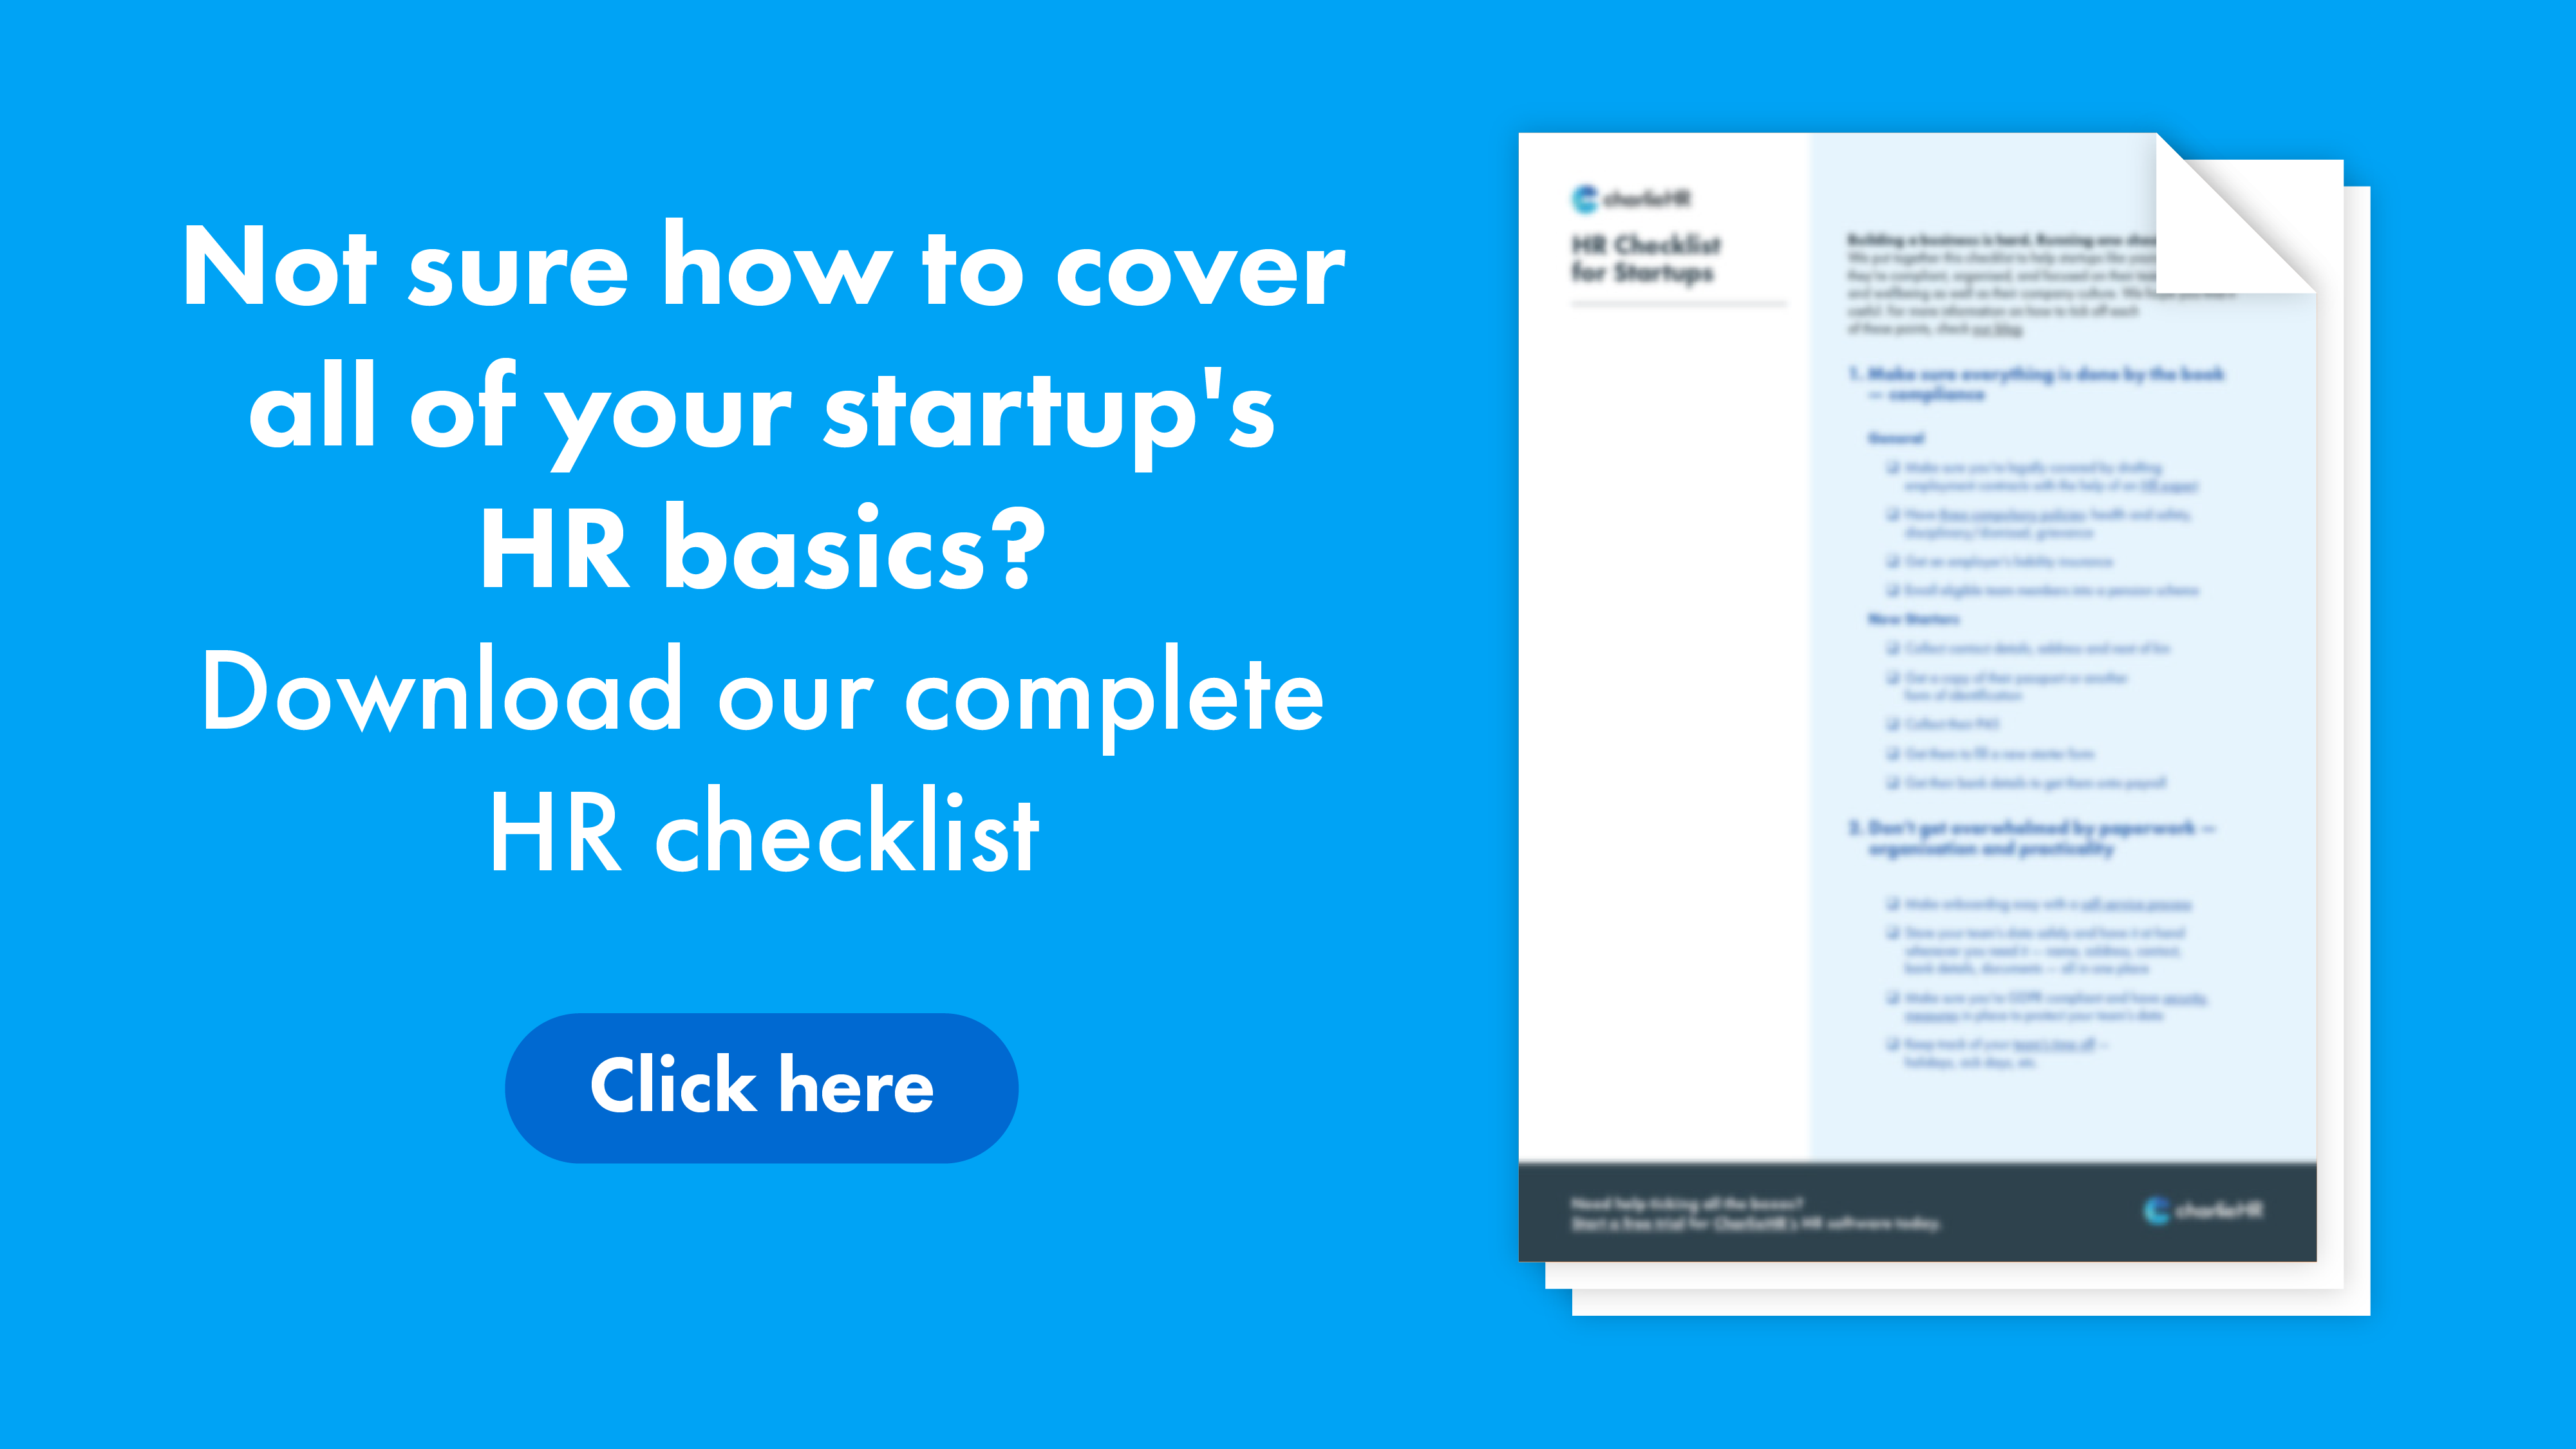 Click here to download HR checklist for startups